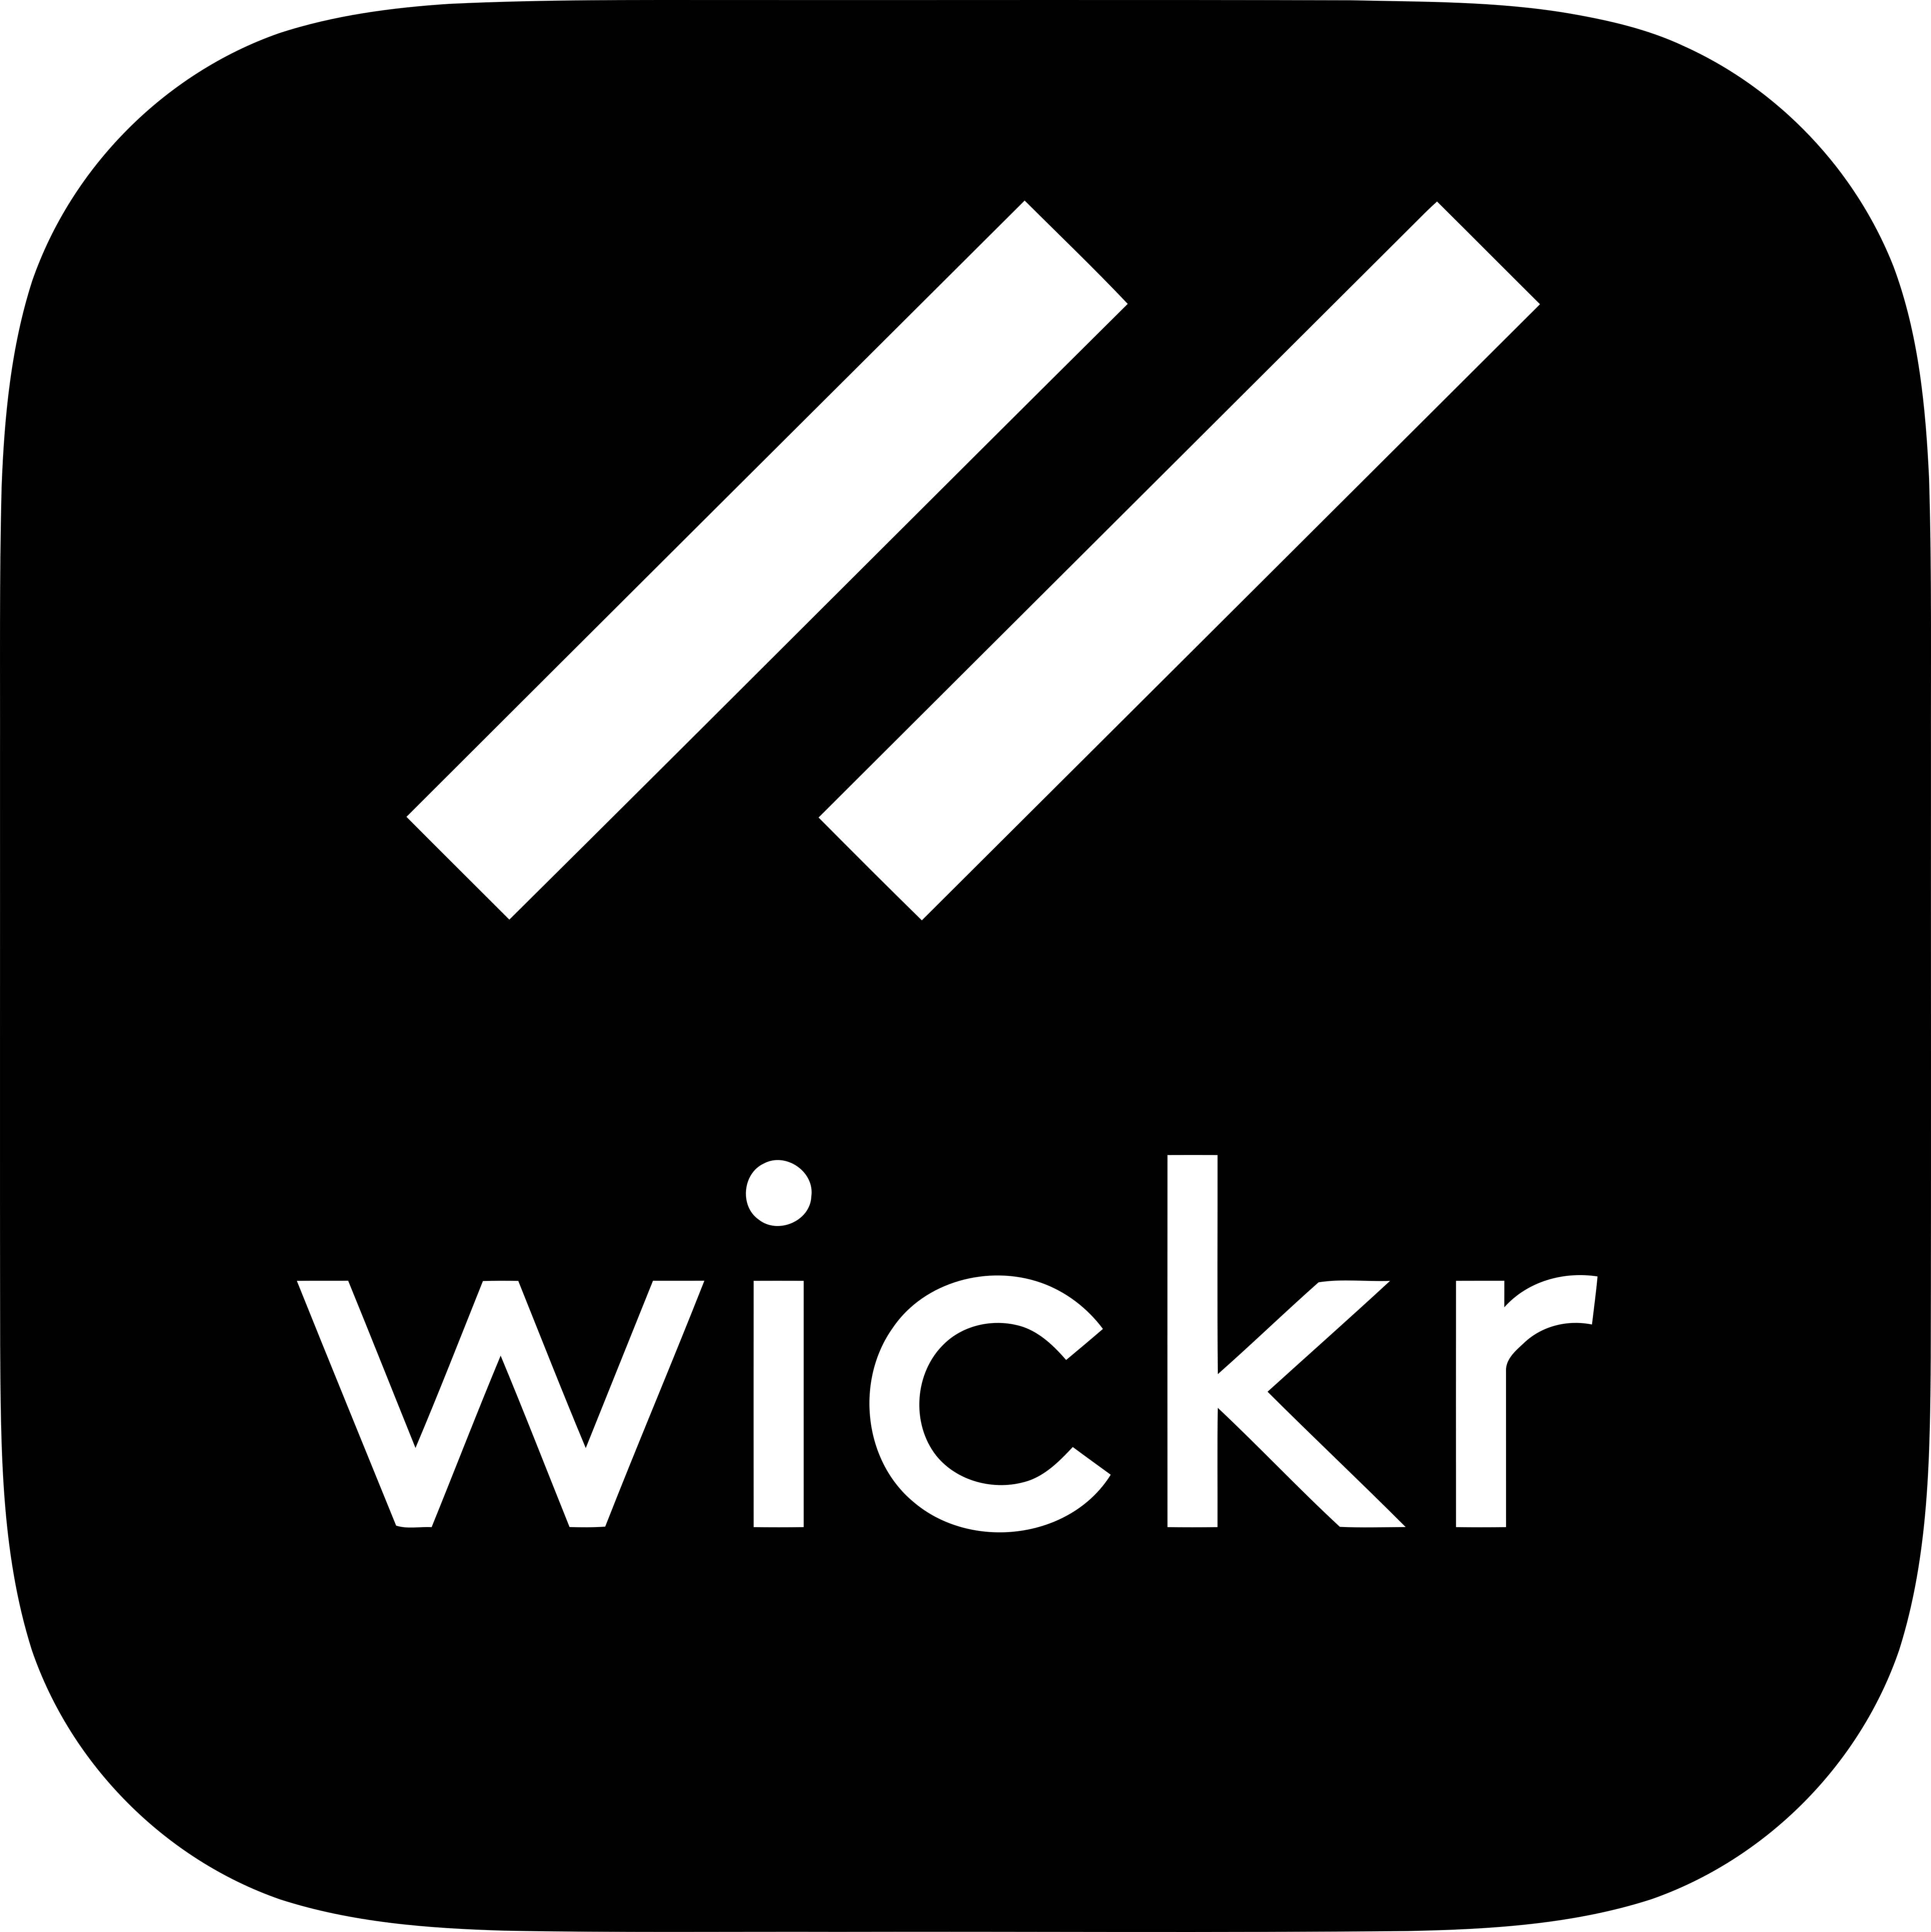 wickr pro signup